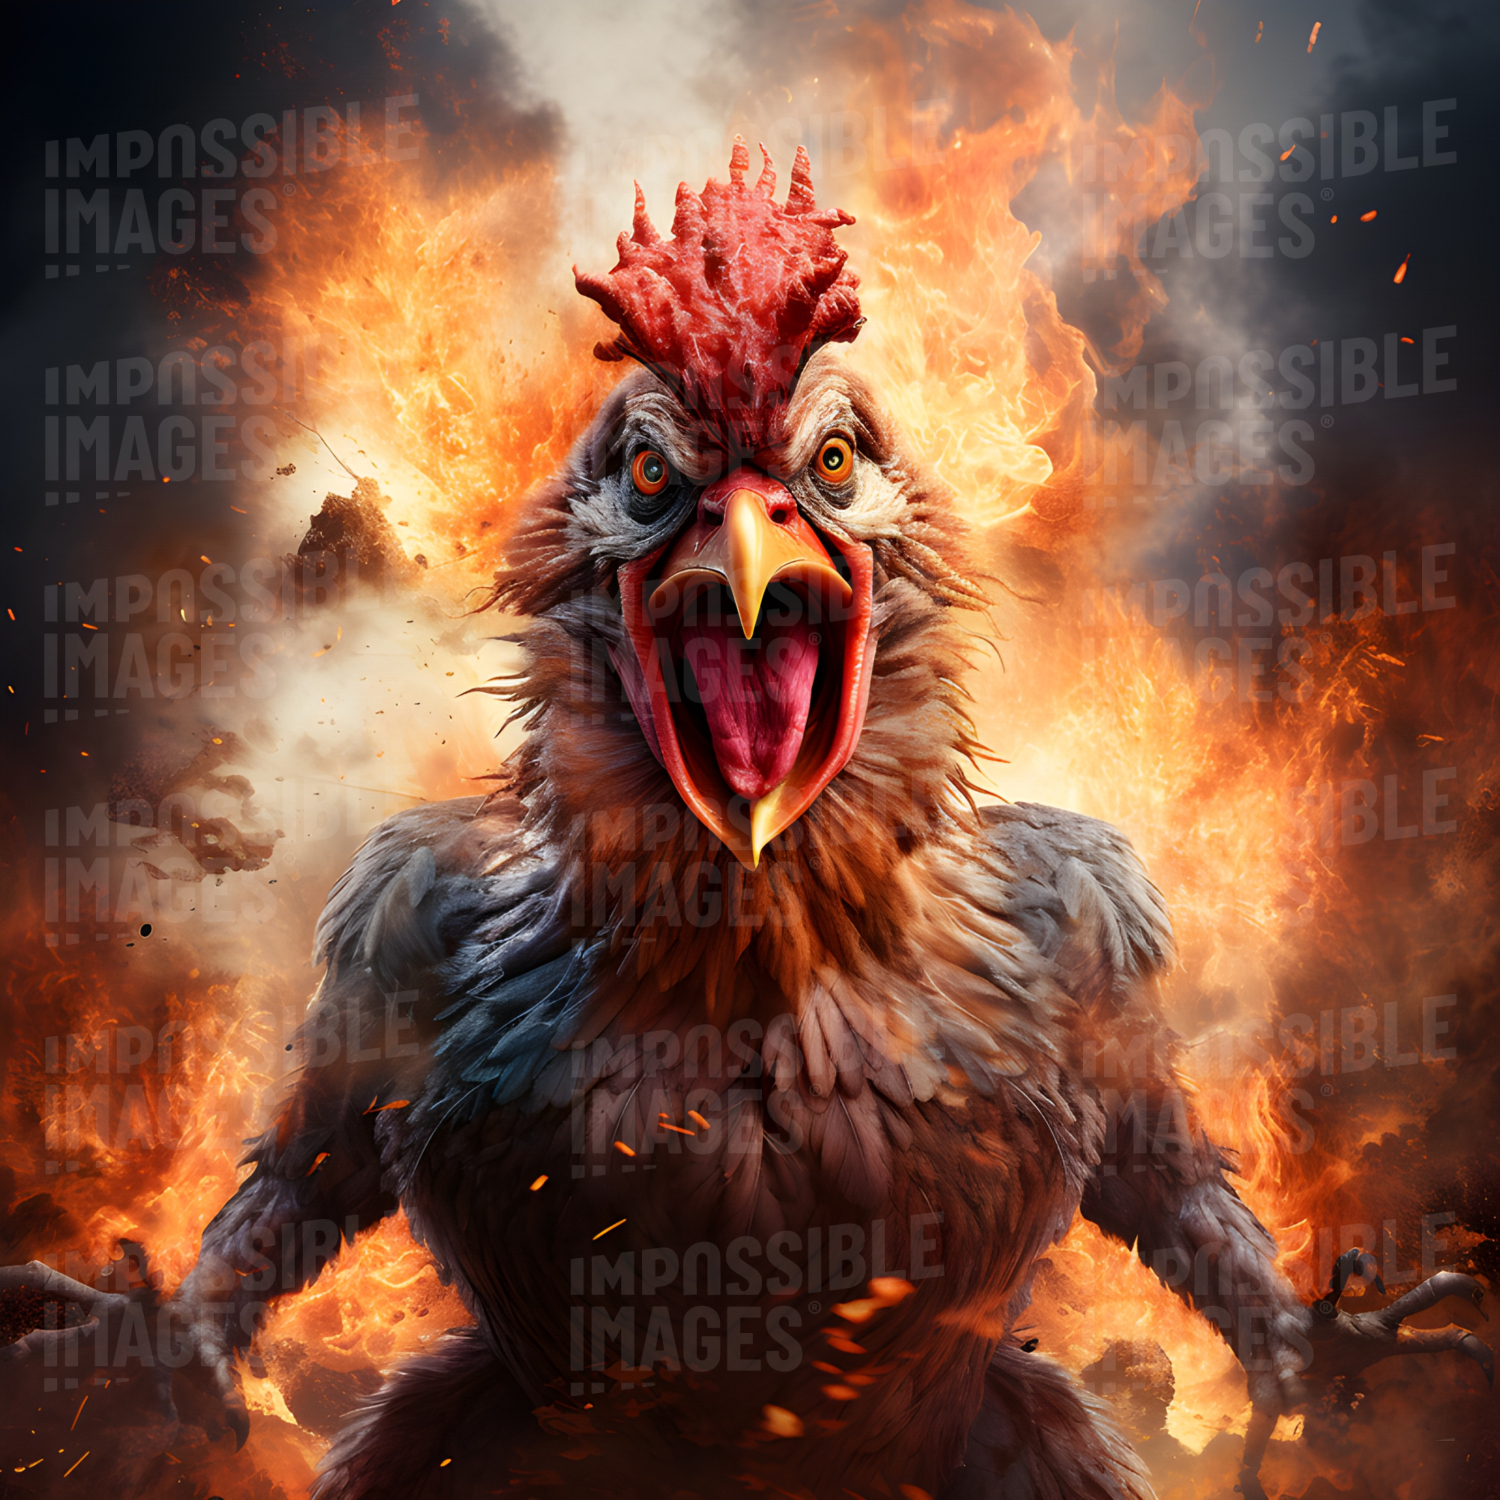 Feel the wrath of the chicken